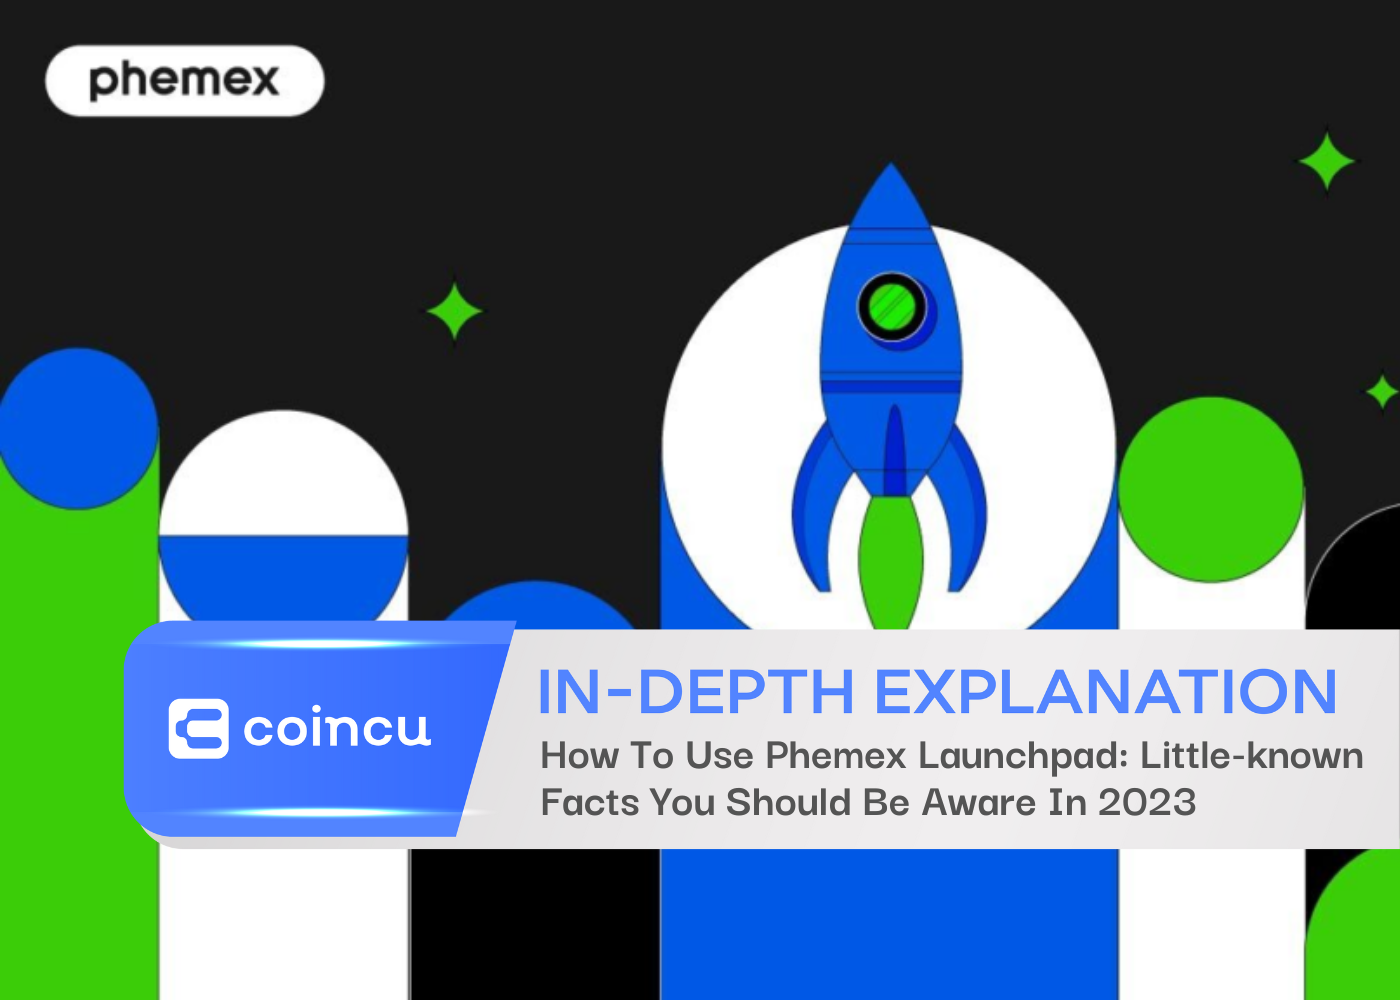 How To Use Phemex Launchpad: Little-known Facts You Should Be Aware In 2023